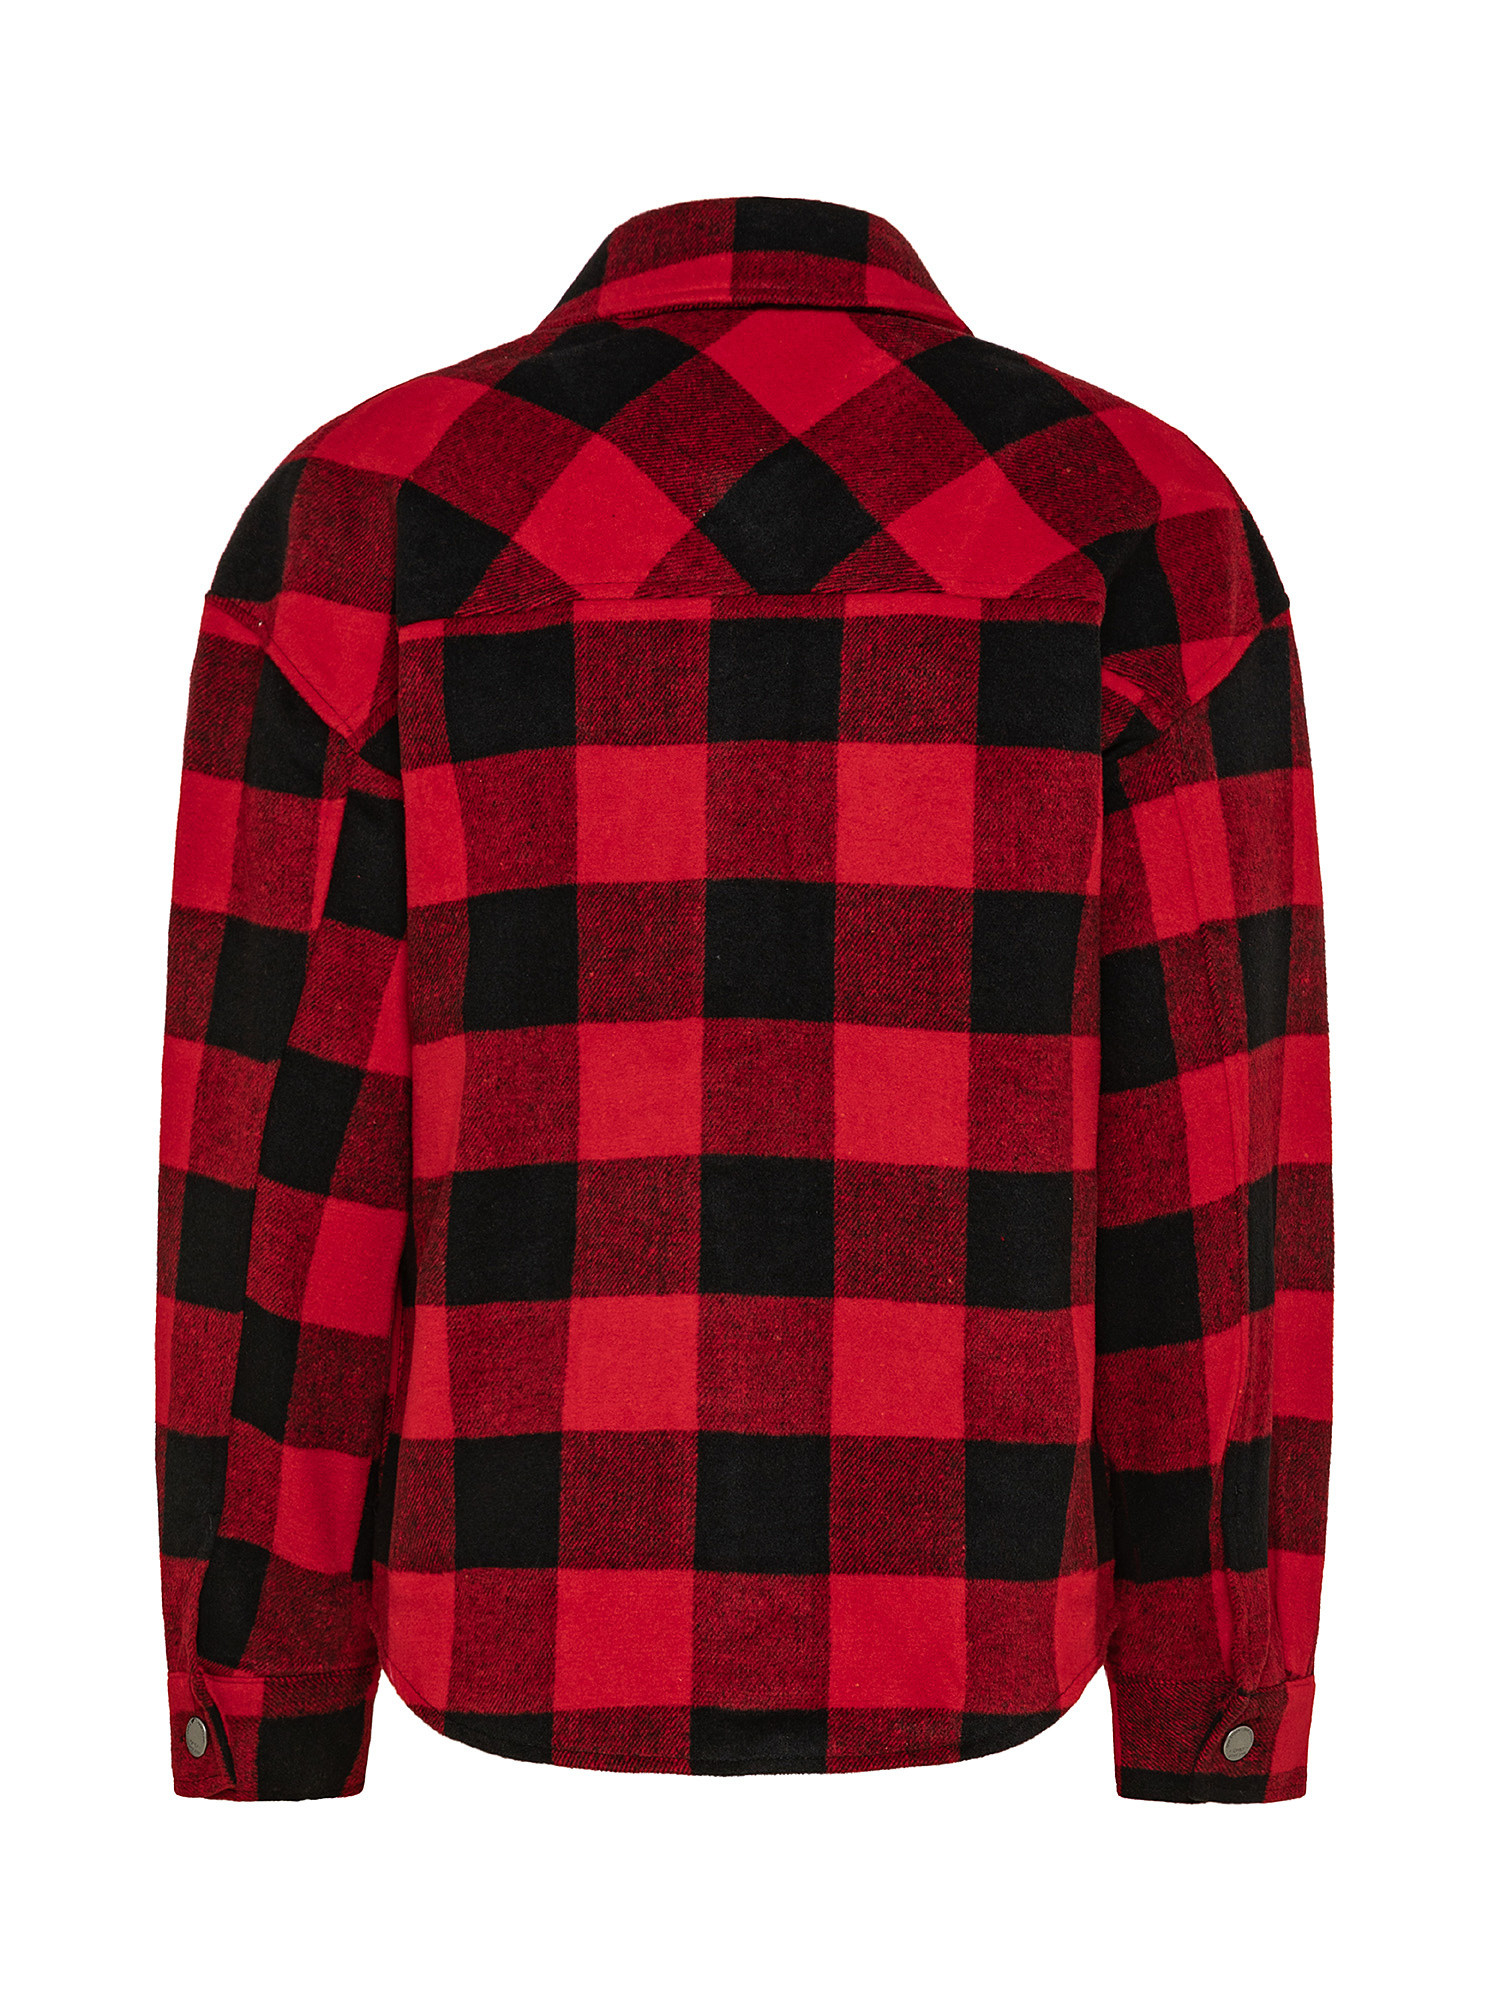 Giacca in fantasia tartan, Rosso, large image number 1